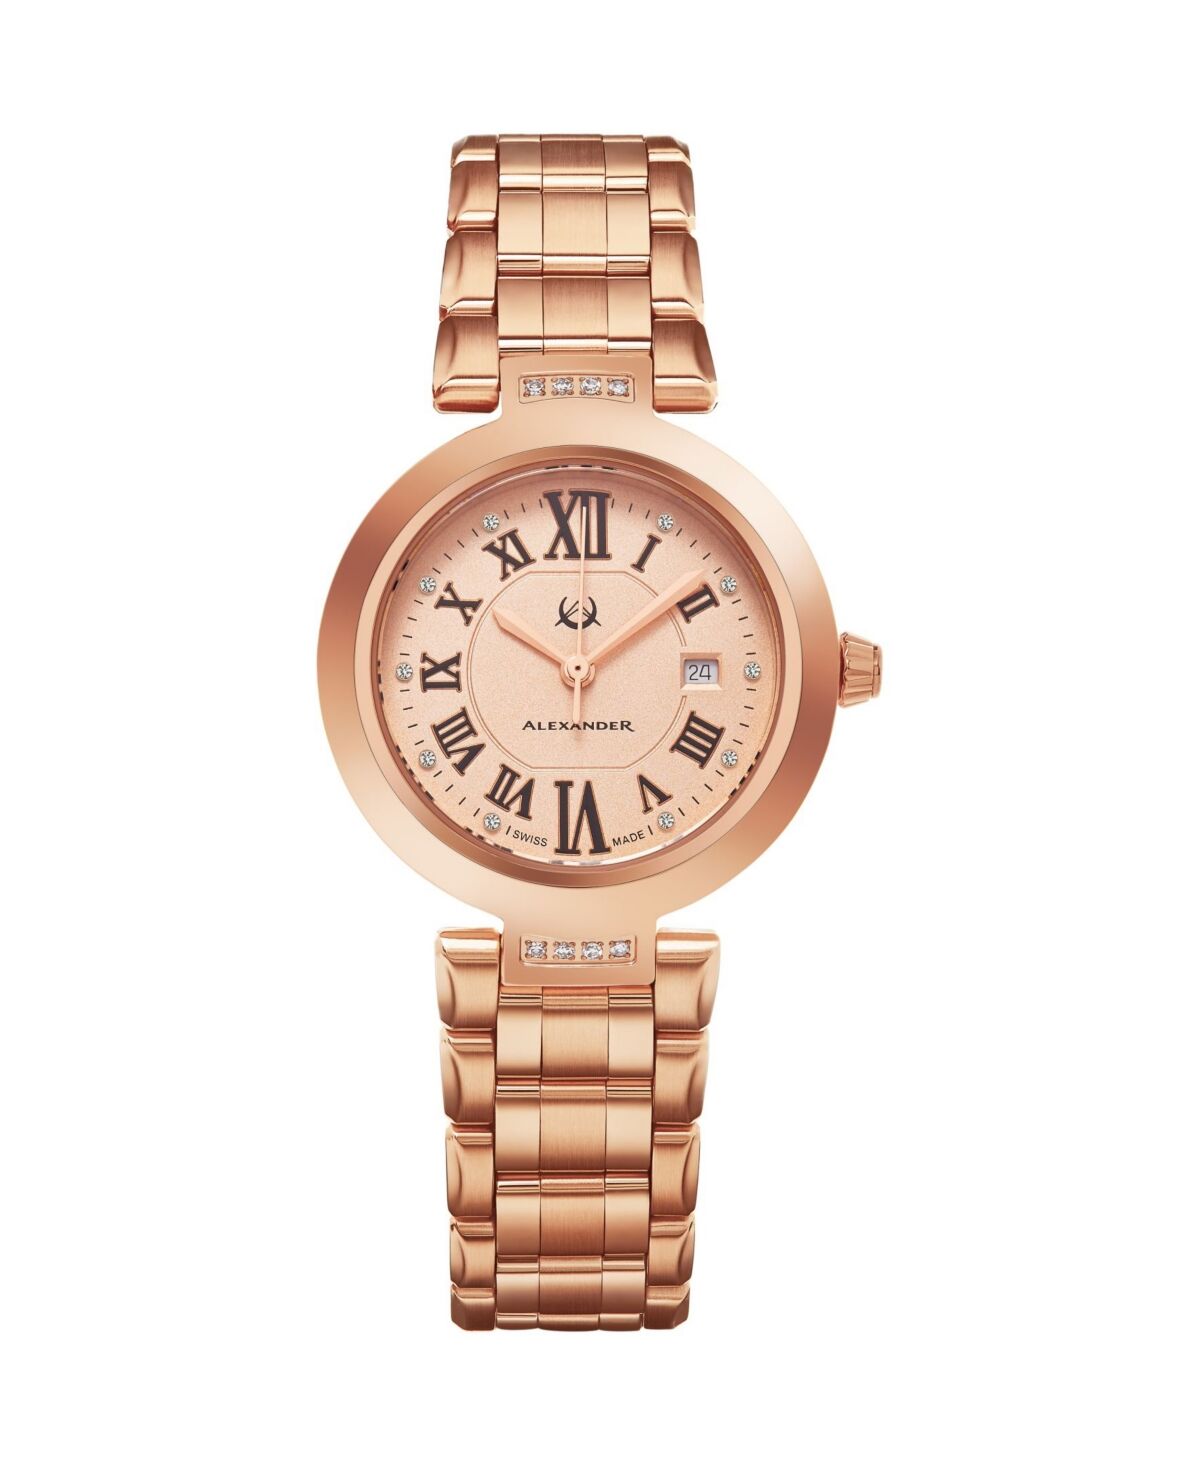 Stuhrling Alexander Watch AD203B-05, Ladies Quartz Date Watch with Rose Gold Tone Stainless Steel Case on Rose Gold Tone Stainless Steel Bracelet - Rose Gold